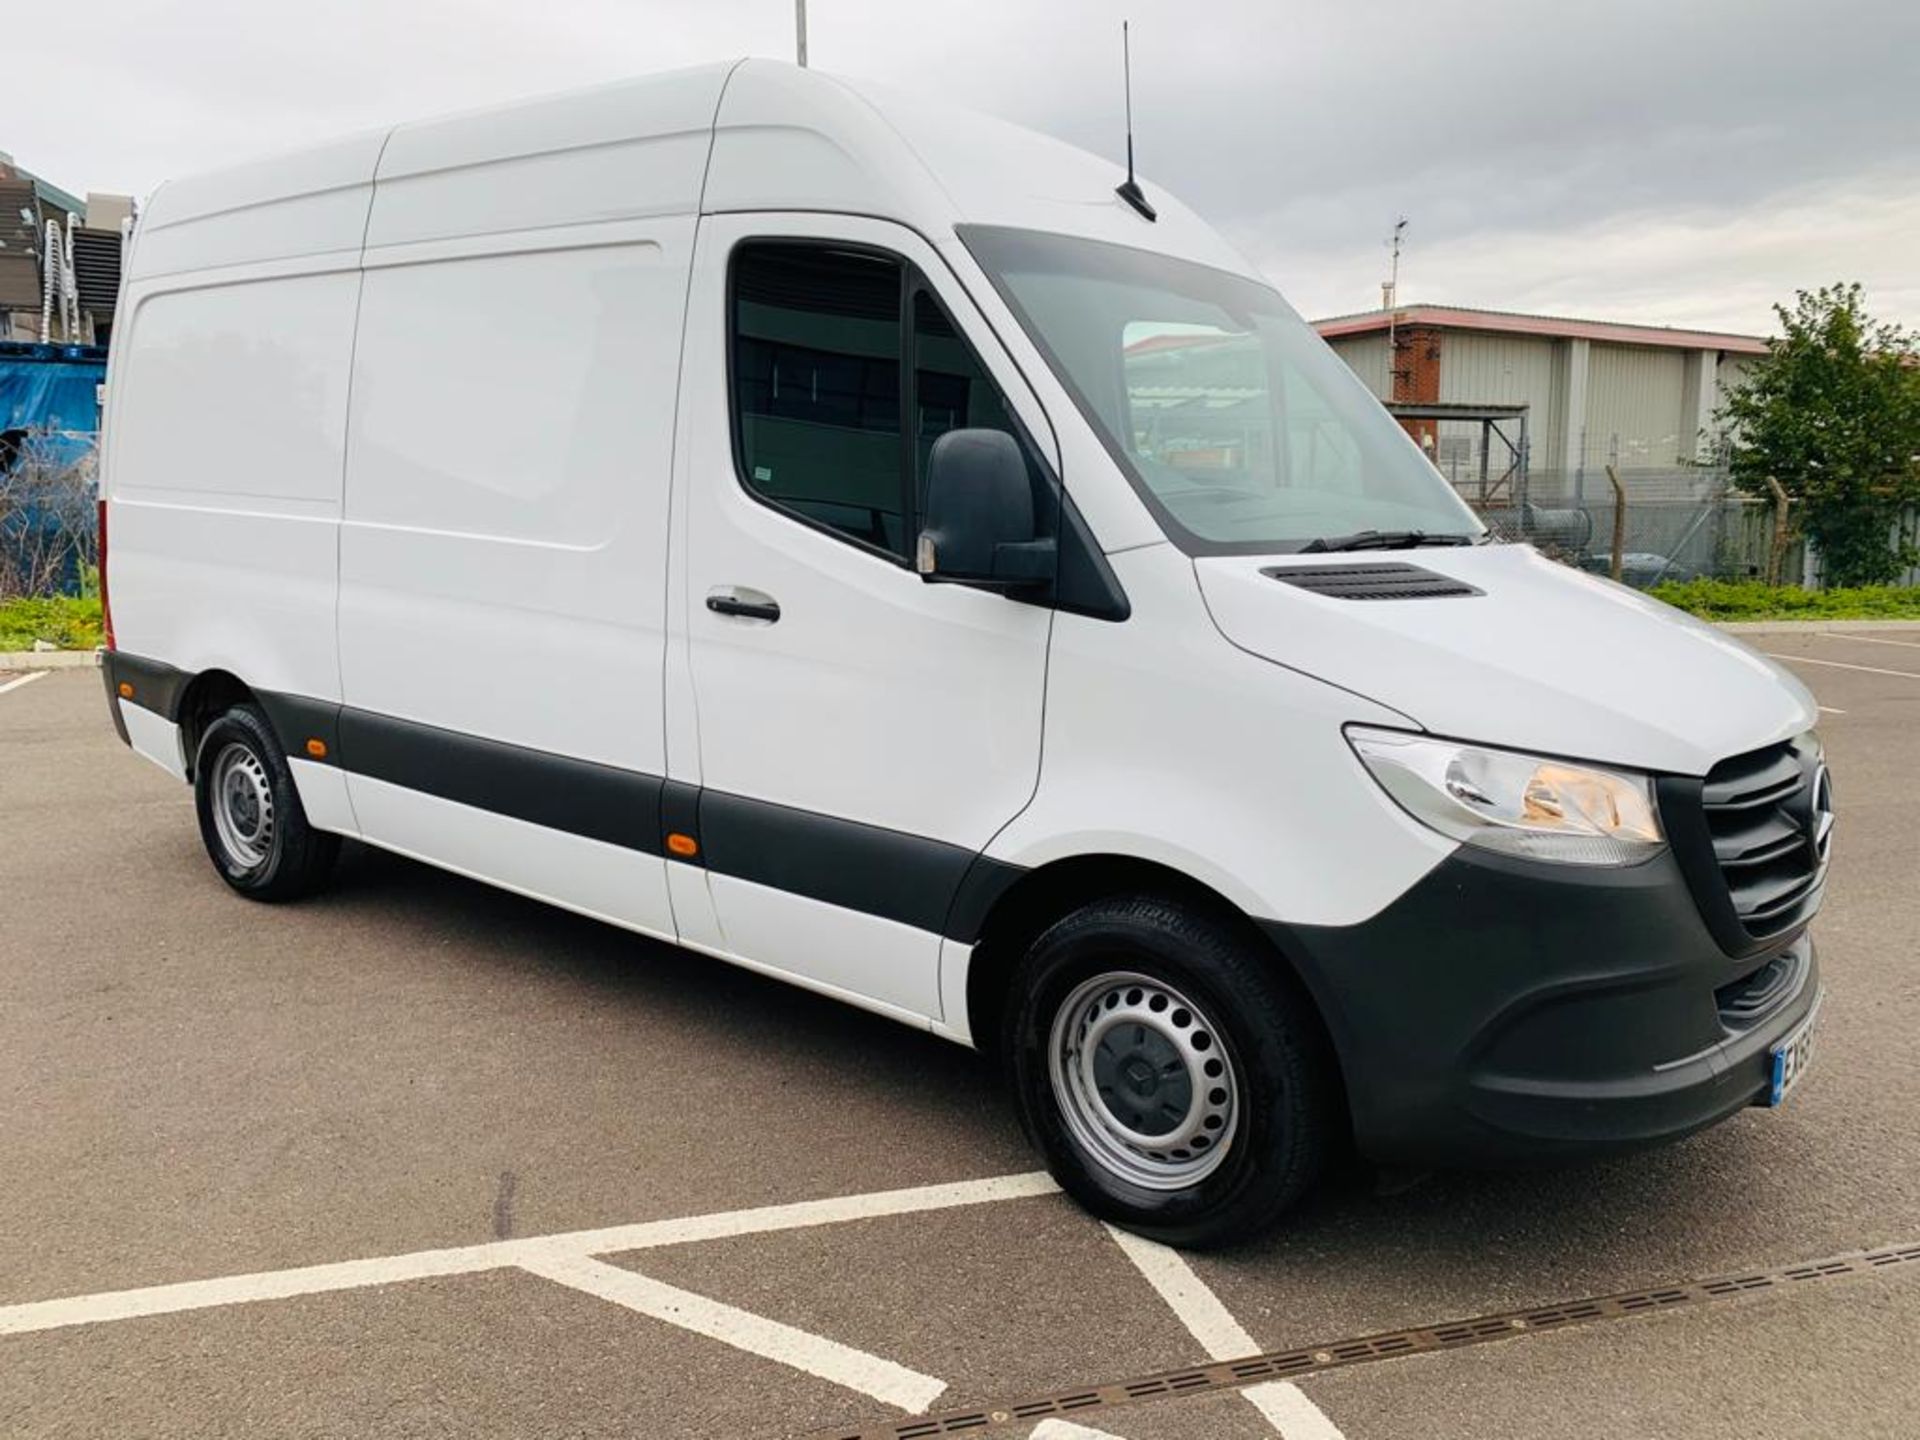 Mercedes Sprinter 314CDI MWB Hi Roof - 2019 Model - Service History - Euro 6 - AIR CON - ONLY 101K